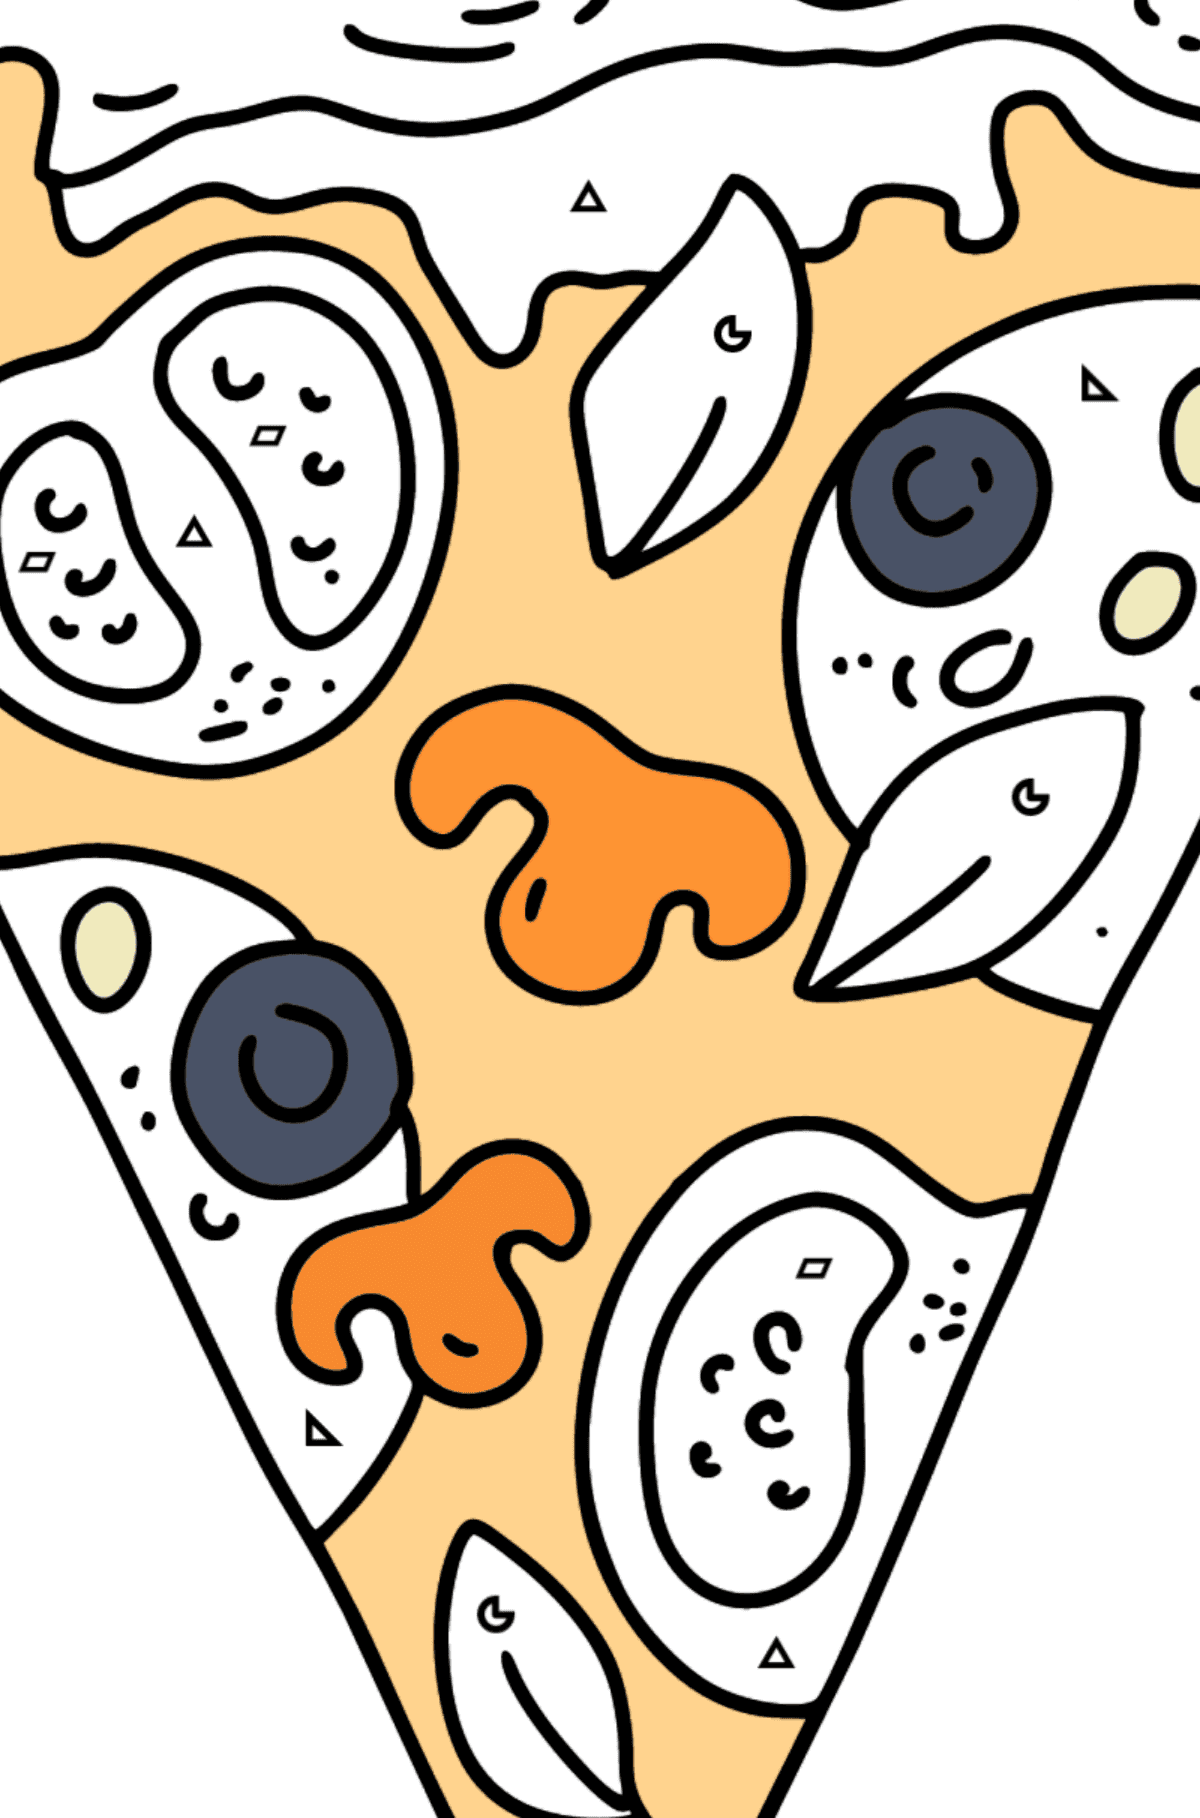 Pizza with Tomatoes and Mushrooms coloring page - Coloring by Geometric Shapes for Kids